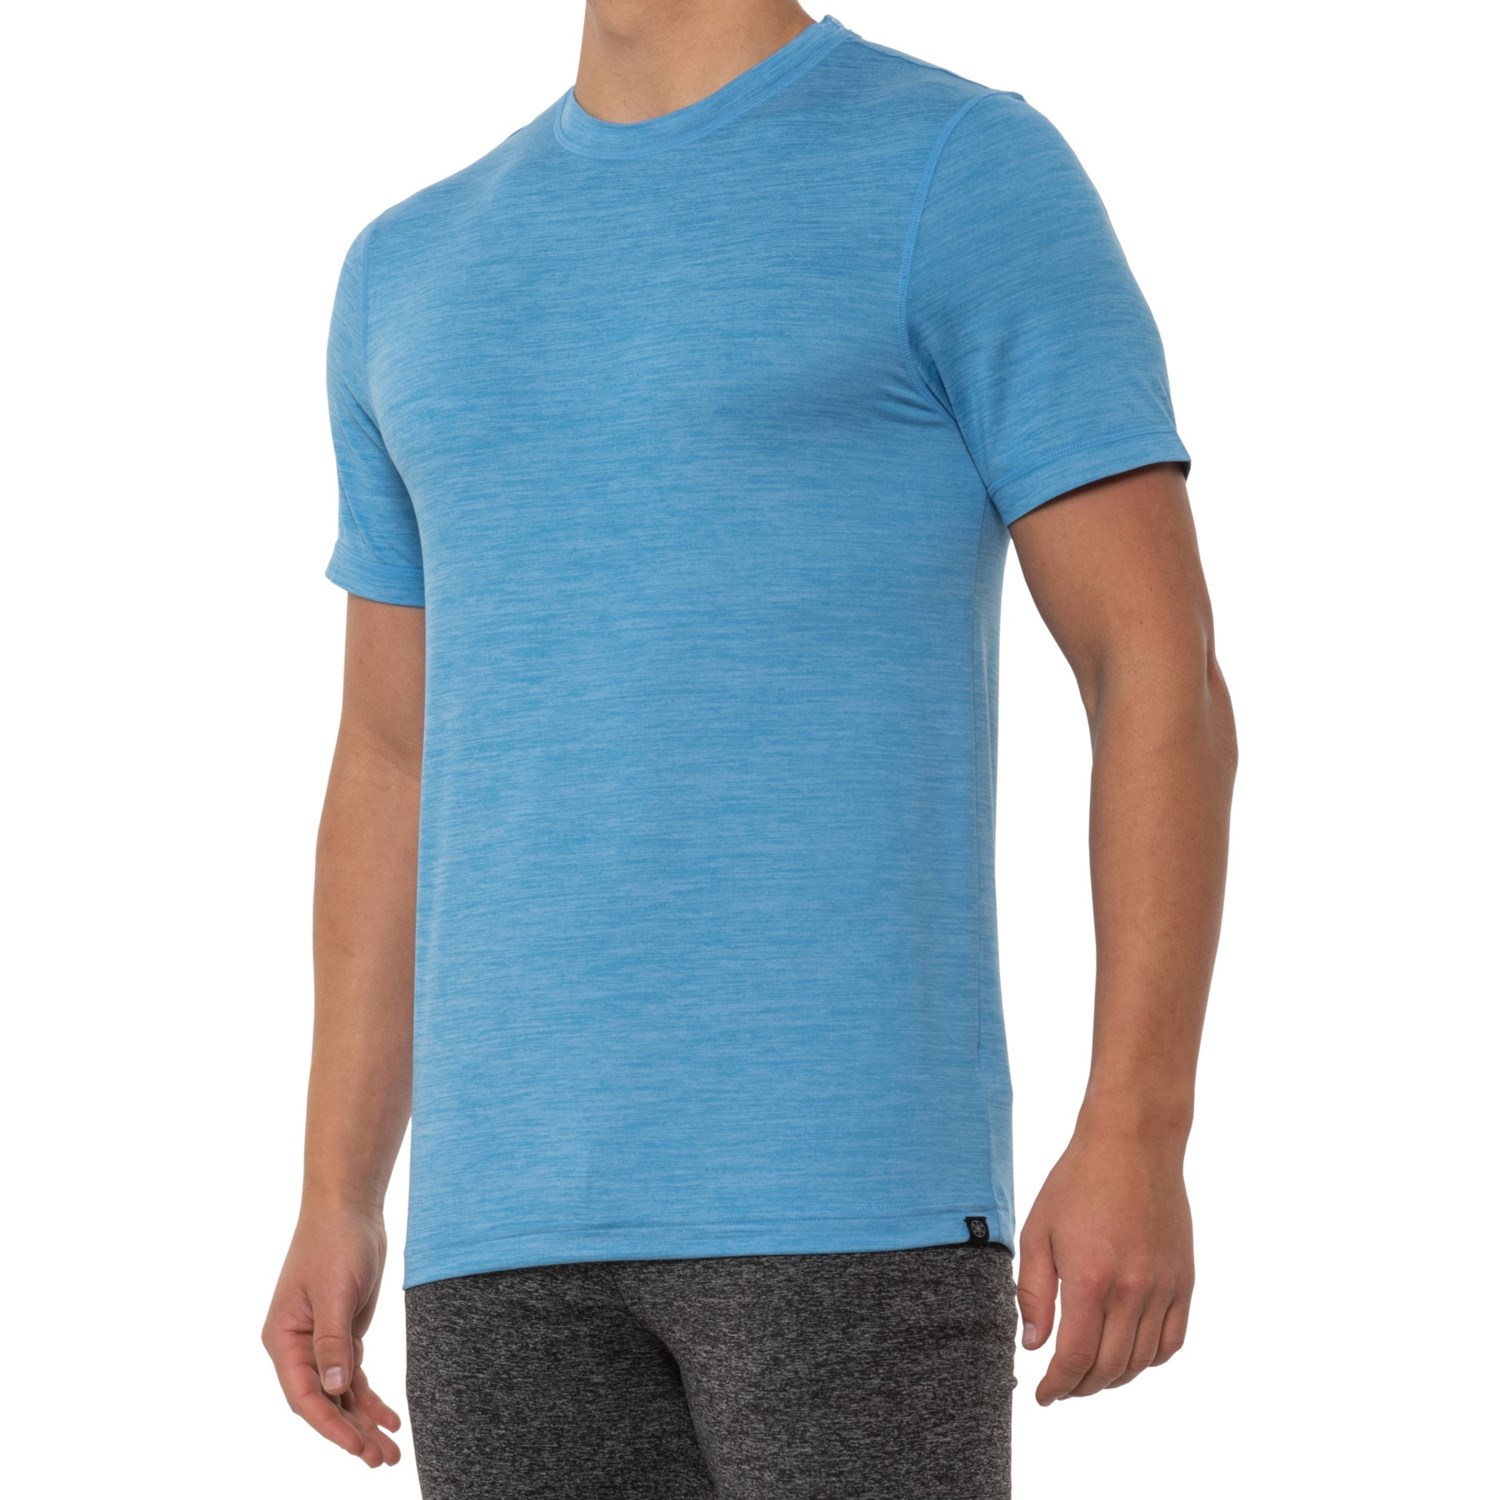 Gaiam Everyday Basic Crew T-Shirt (For Men) - Save 42%